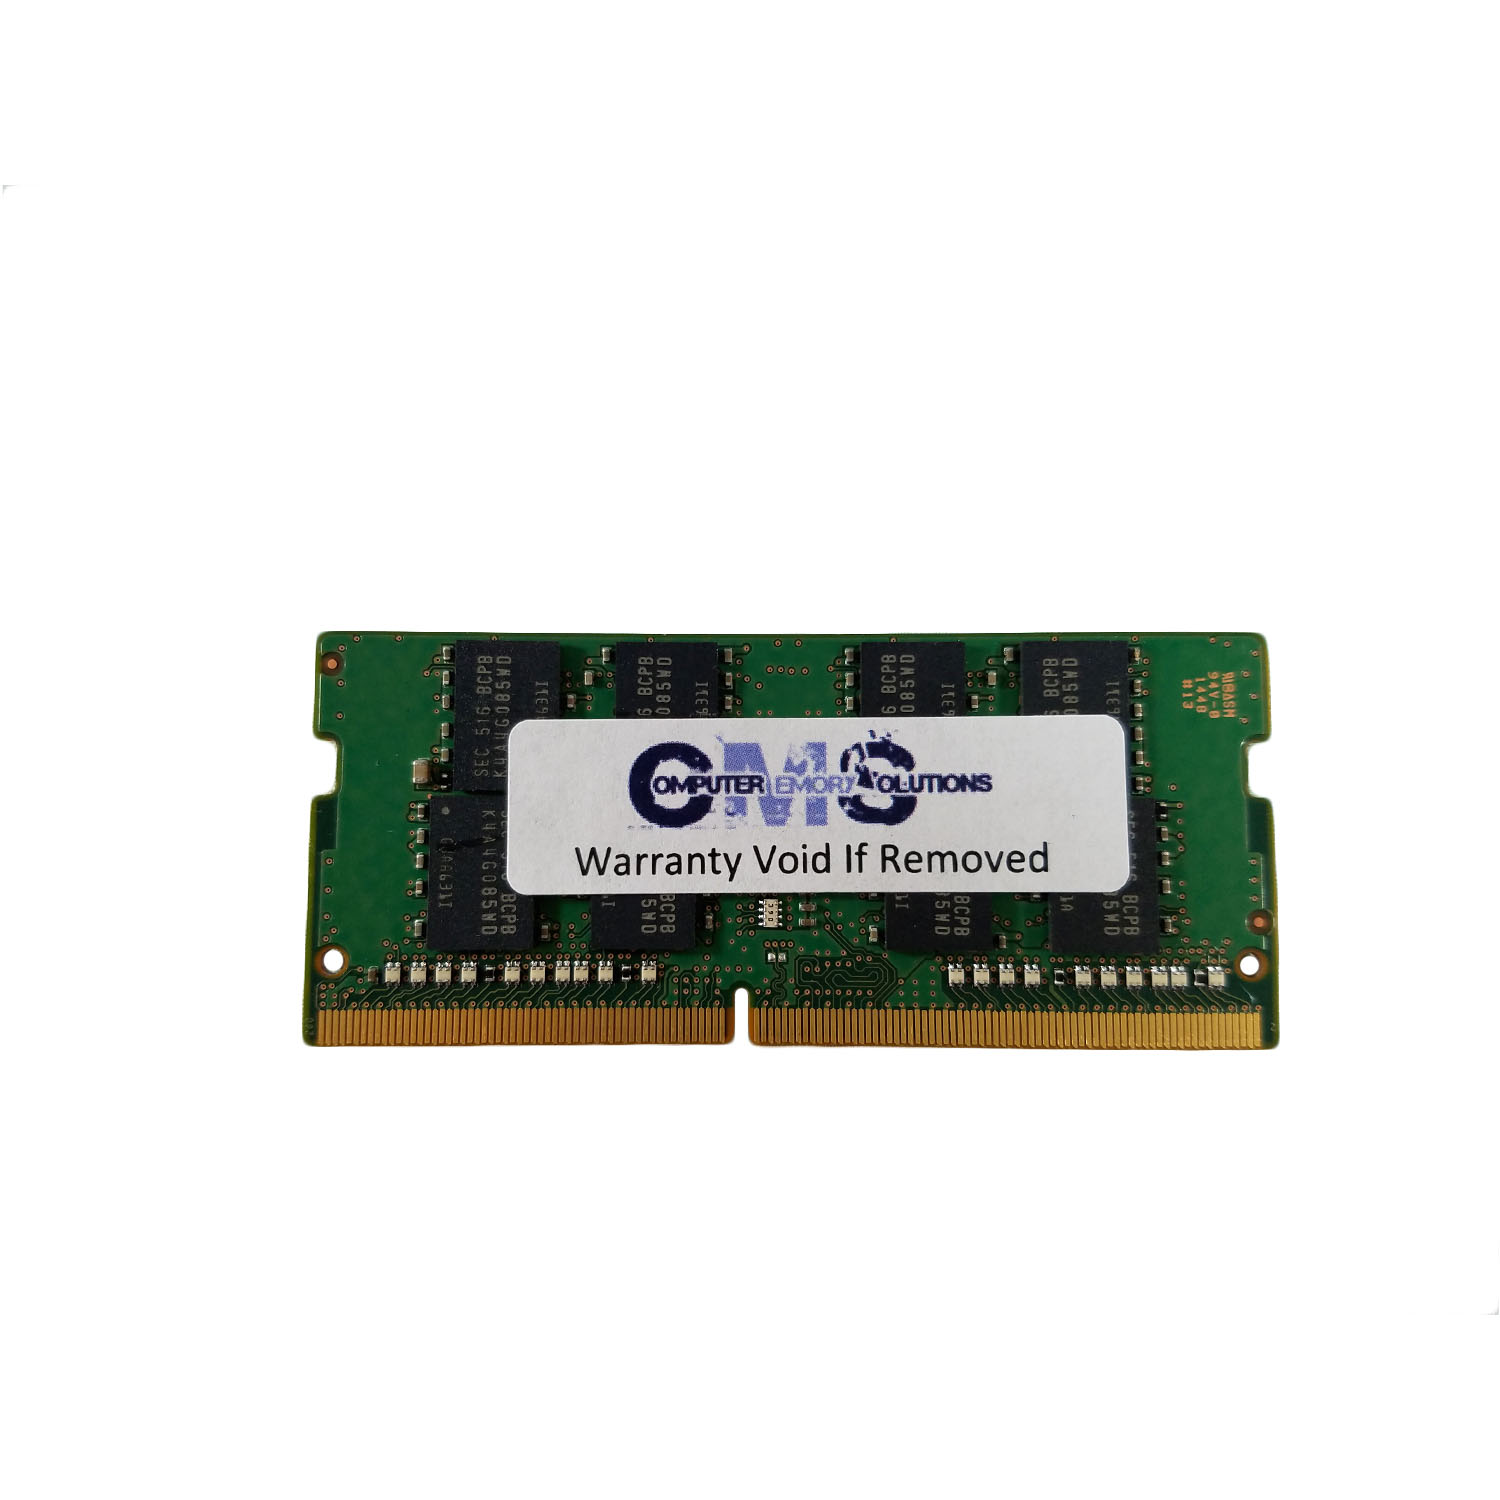 CMS 4GB (1X4GB) DDR4 19200 2400MHZ NON ECC SODIMM Memory Ram Compatible with HP/Compaq Workstation Z1 G3 - C105 - image 1 of 3